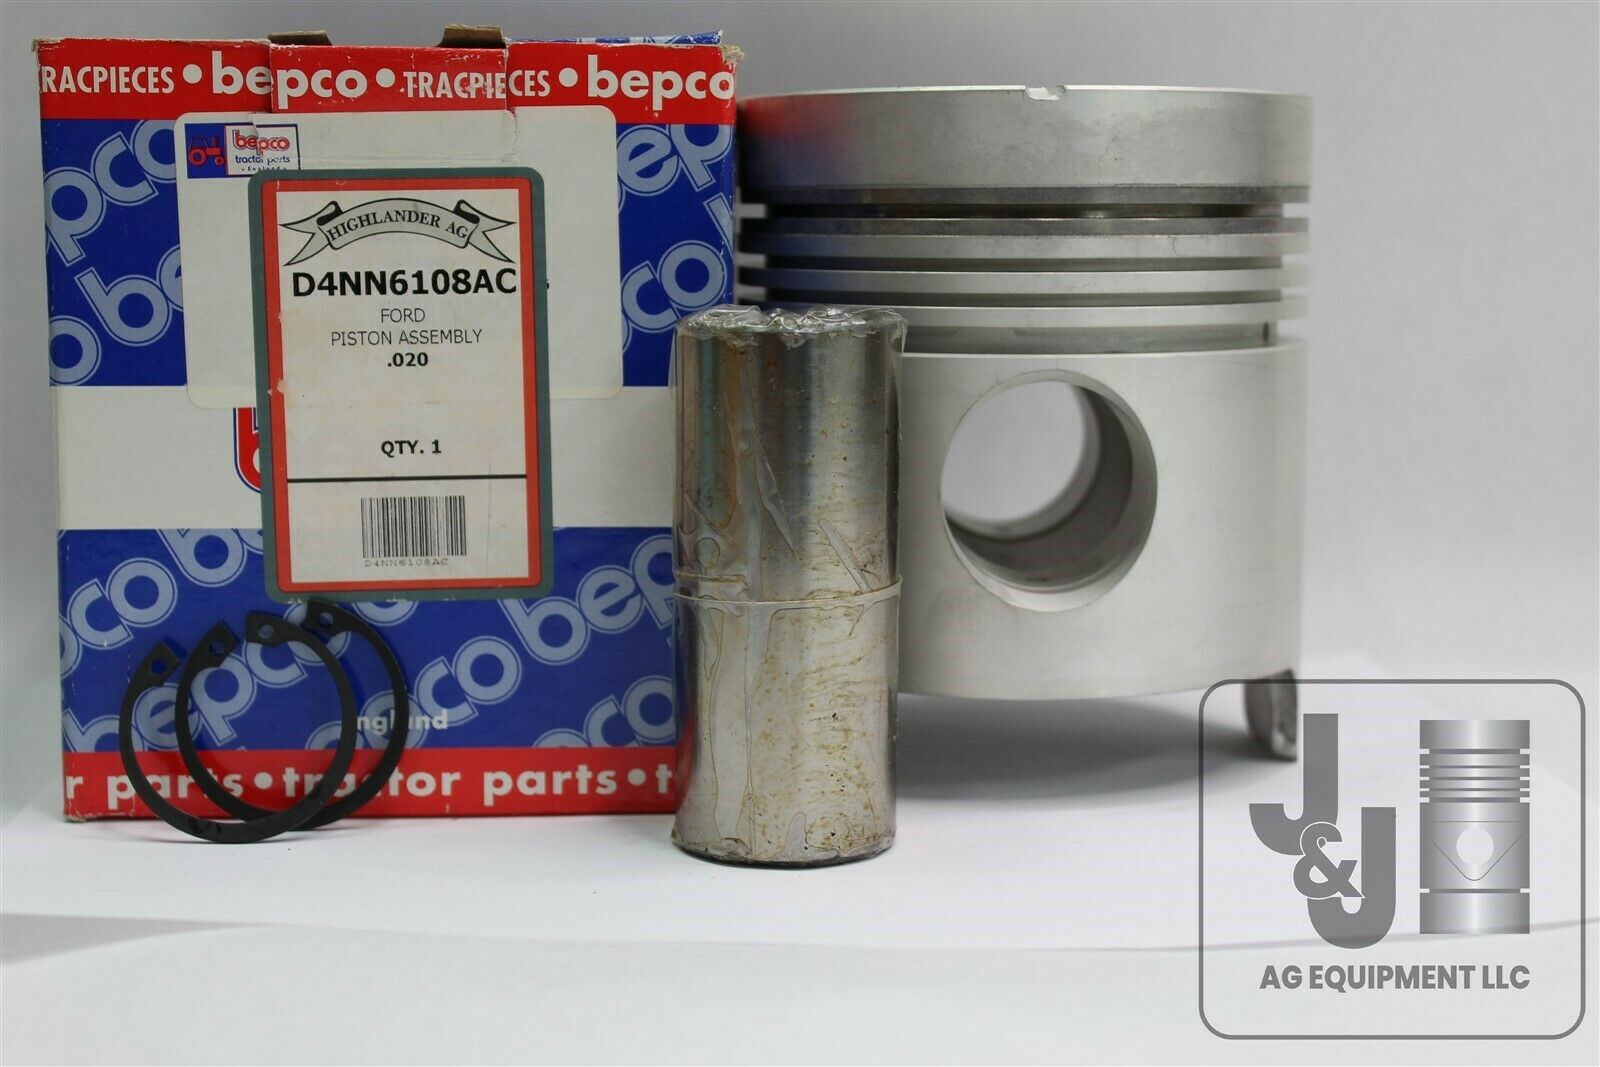 BEPCO D4NN6108AC FORD PISTON ASSEMBLY .020 5550, 5100, 5200